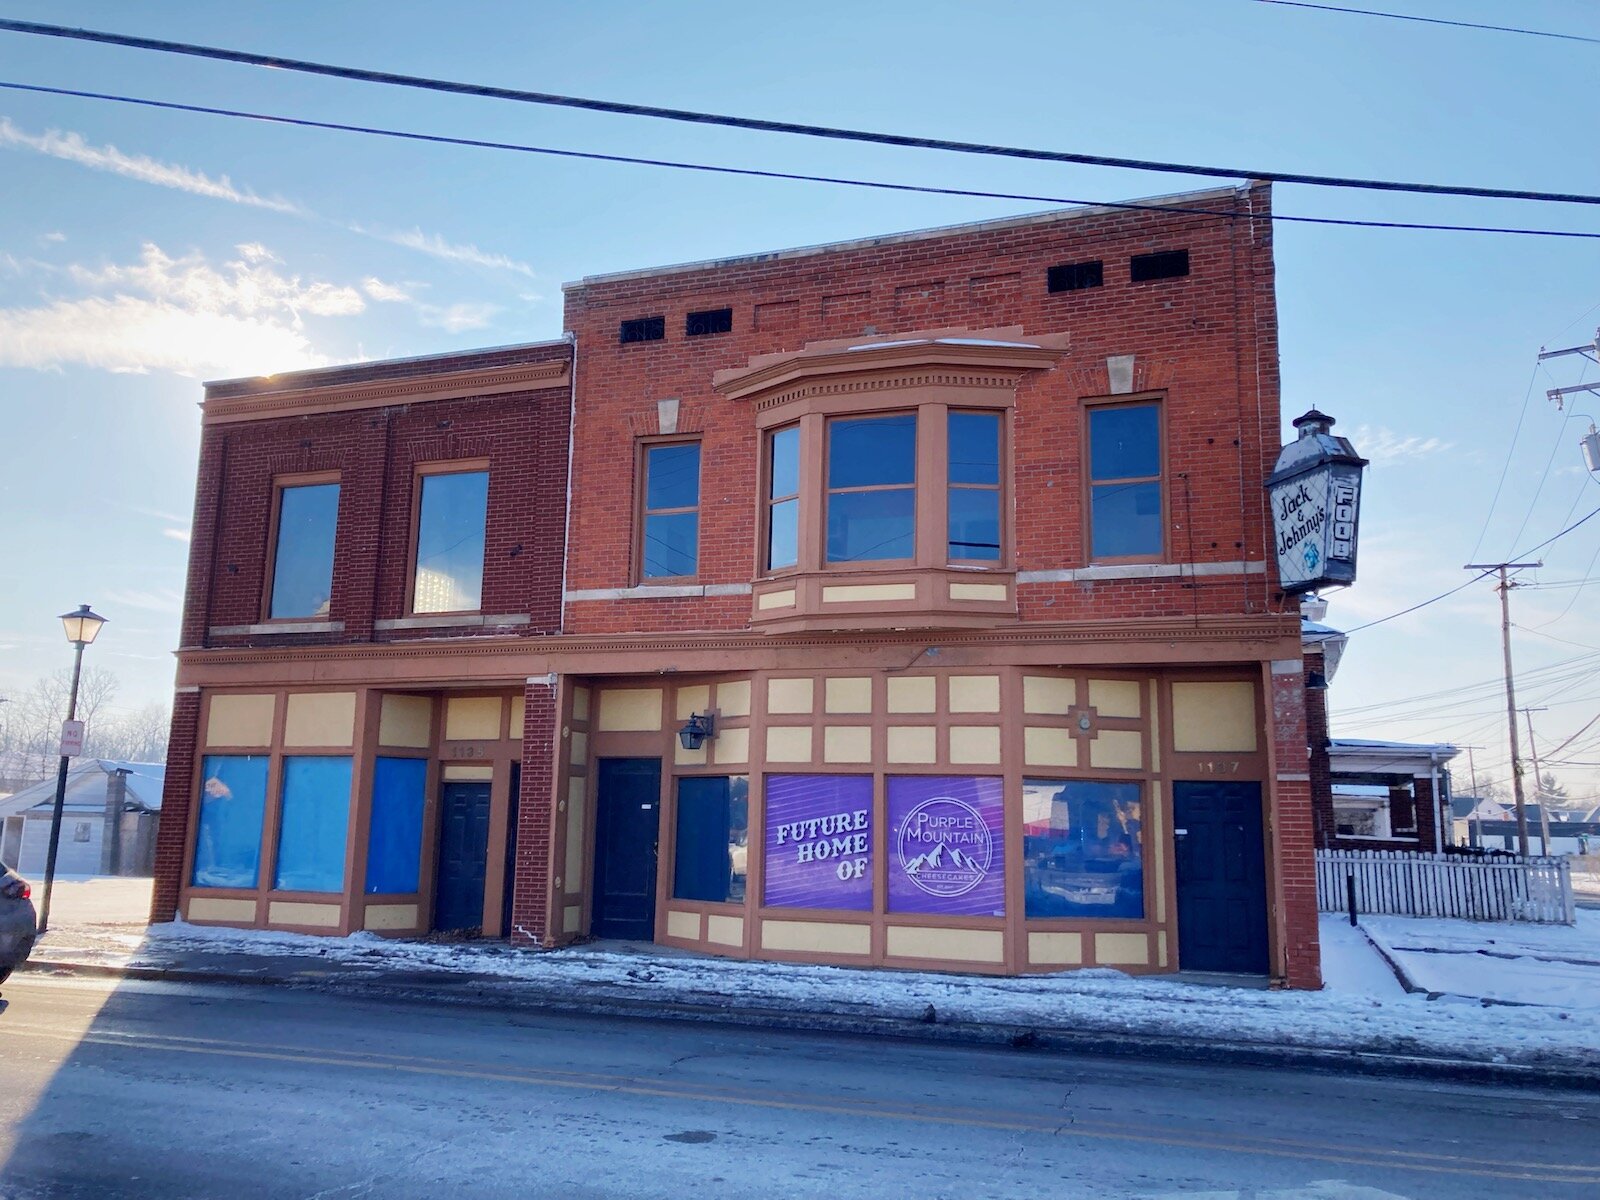 Renovation continues at the Jack & Johnny’s building at 1137 N. Wells St. owned by Purple Mountain Cheesecakes and Desserts.